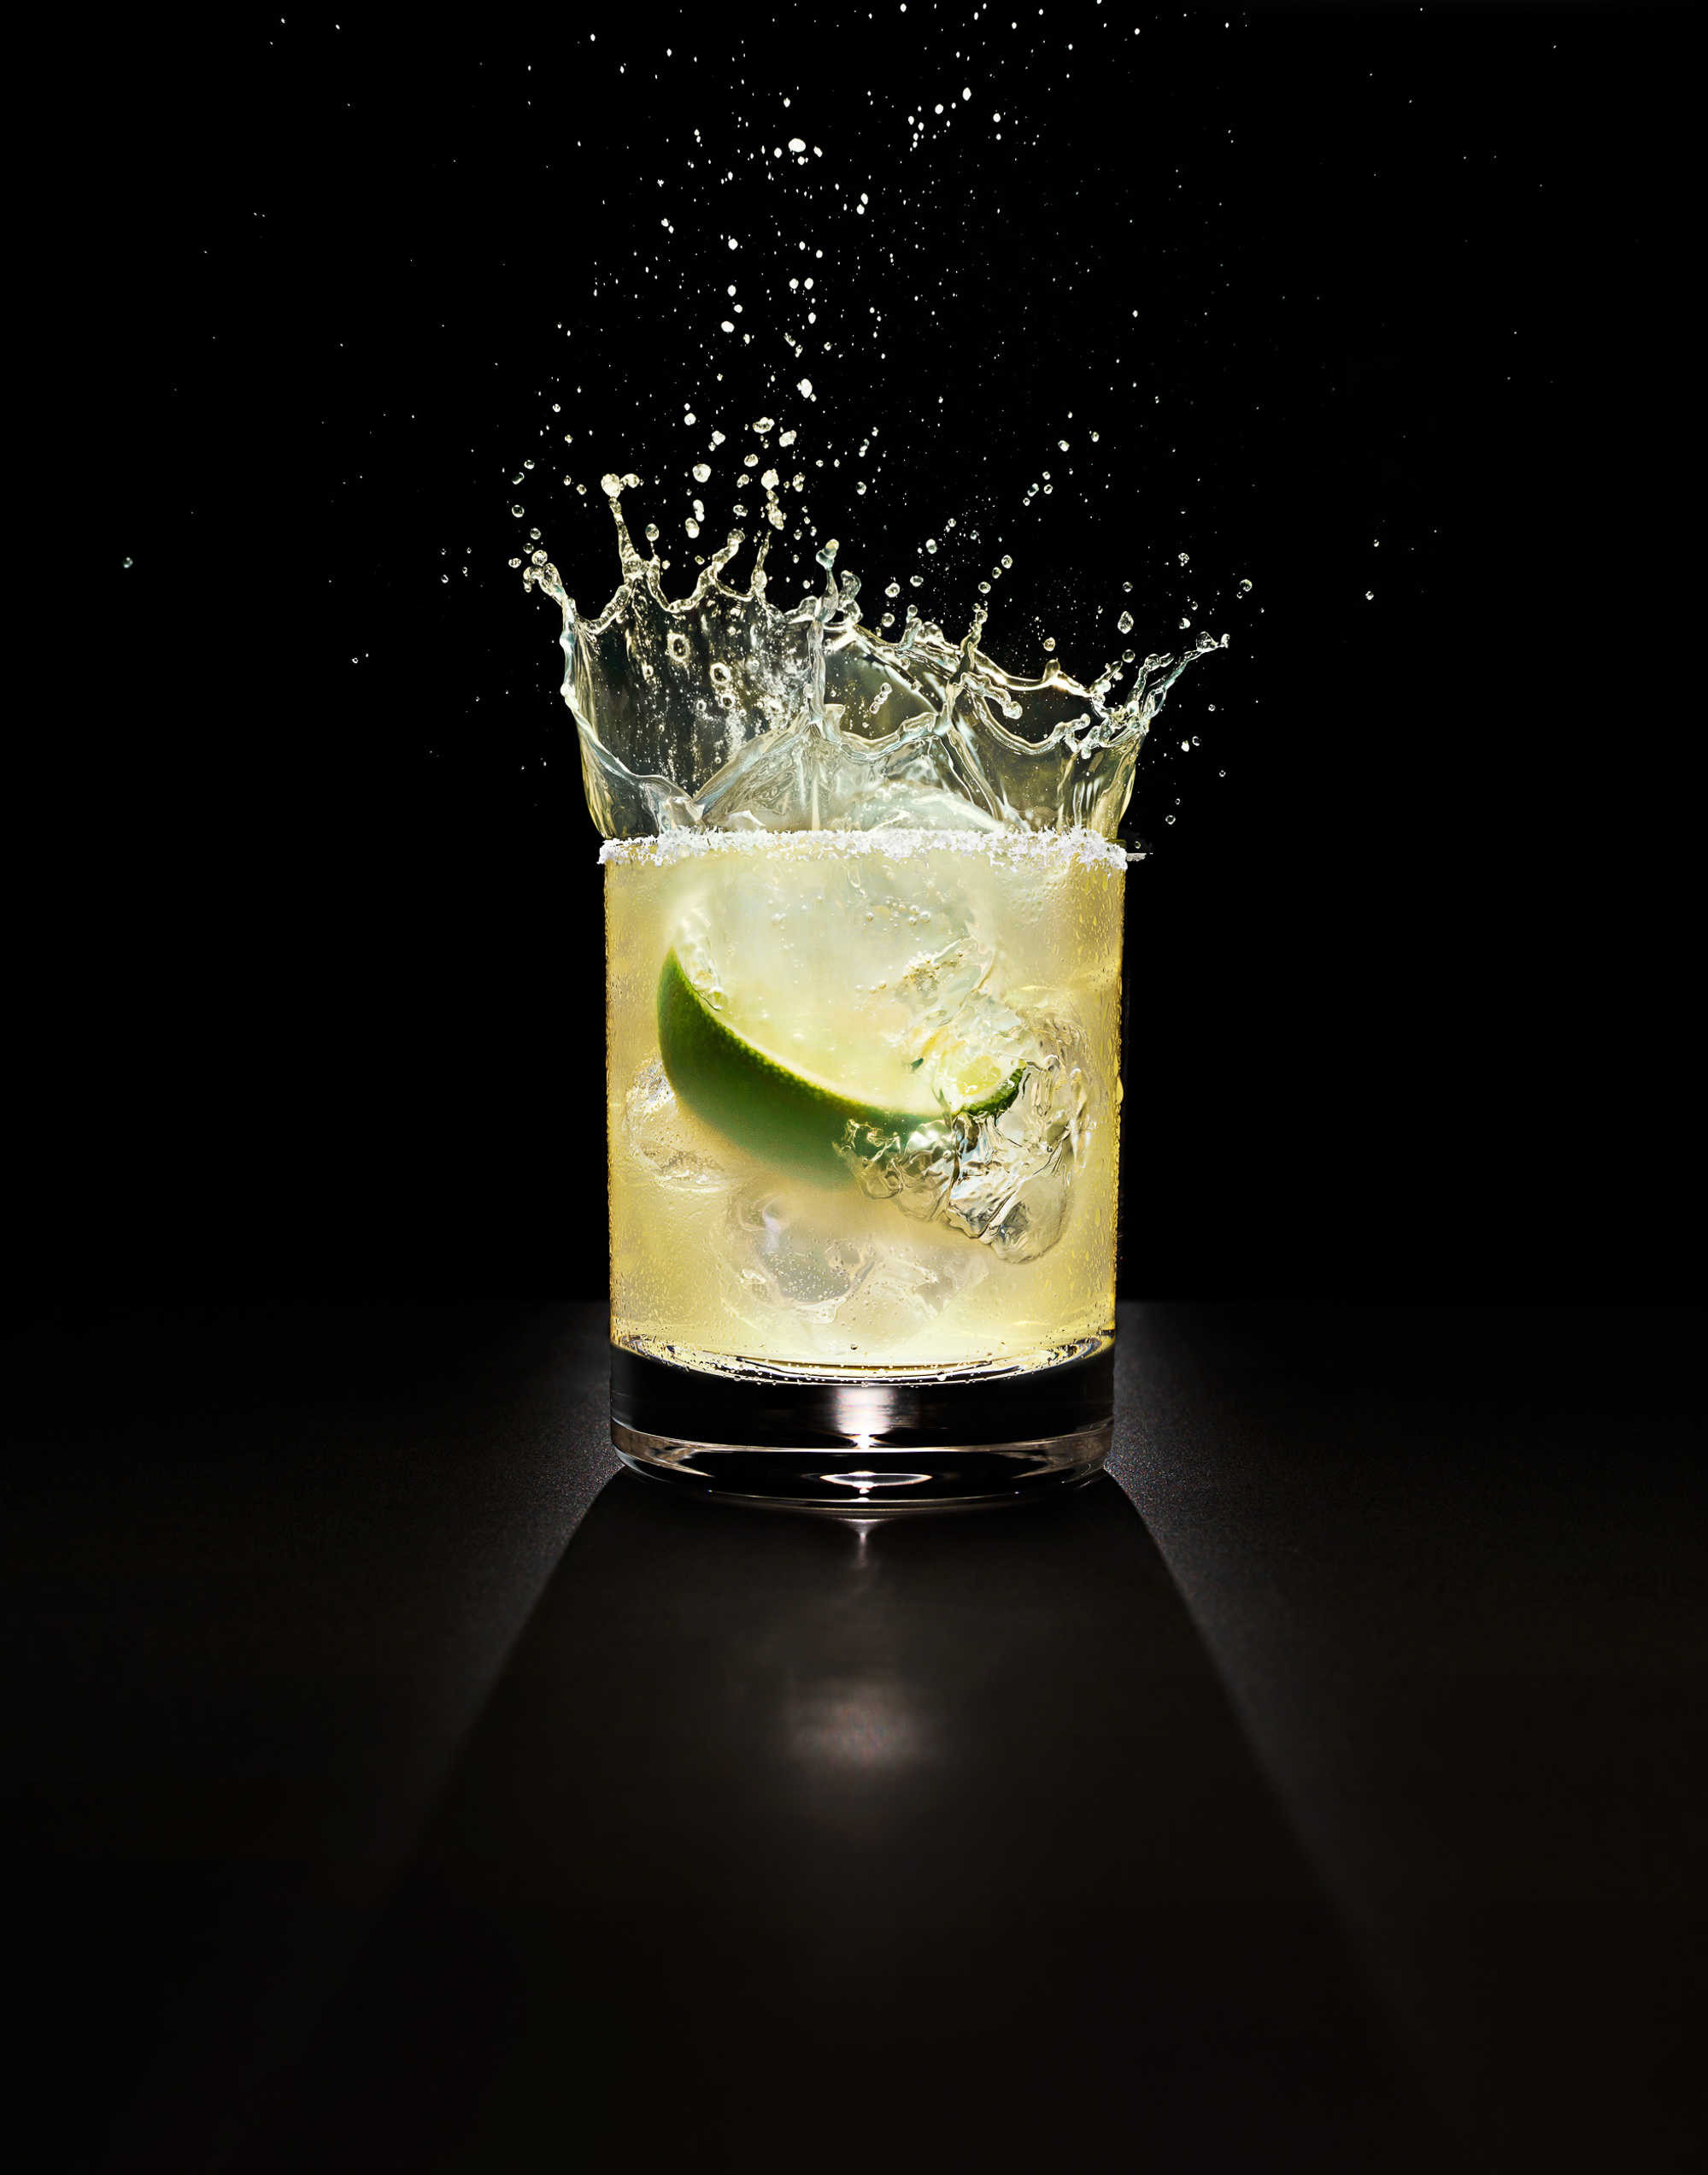 Jose Cuervo Golden Margarita cocktail splash photography by beverage photographer Timothy Hogan. 

Beverages and alcohol product & advertising photography by Timothy Hogan Studio in Los Angeles